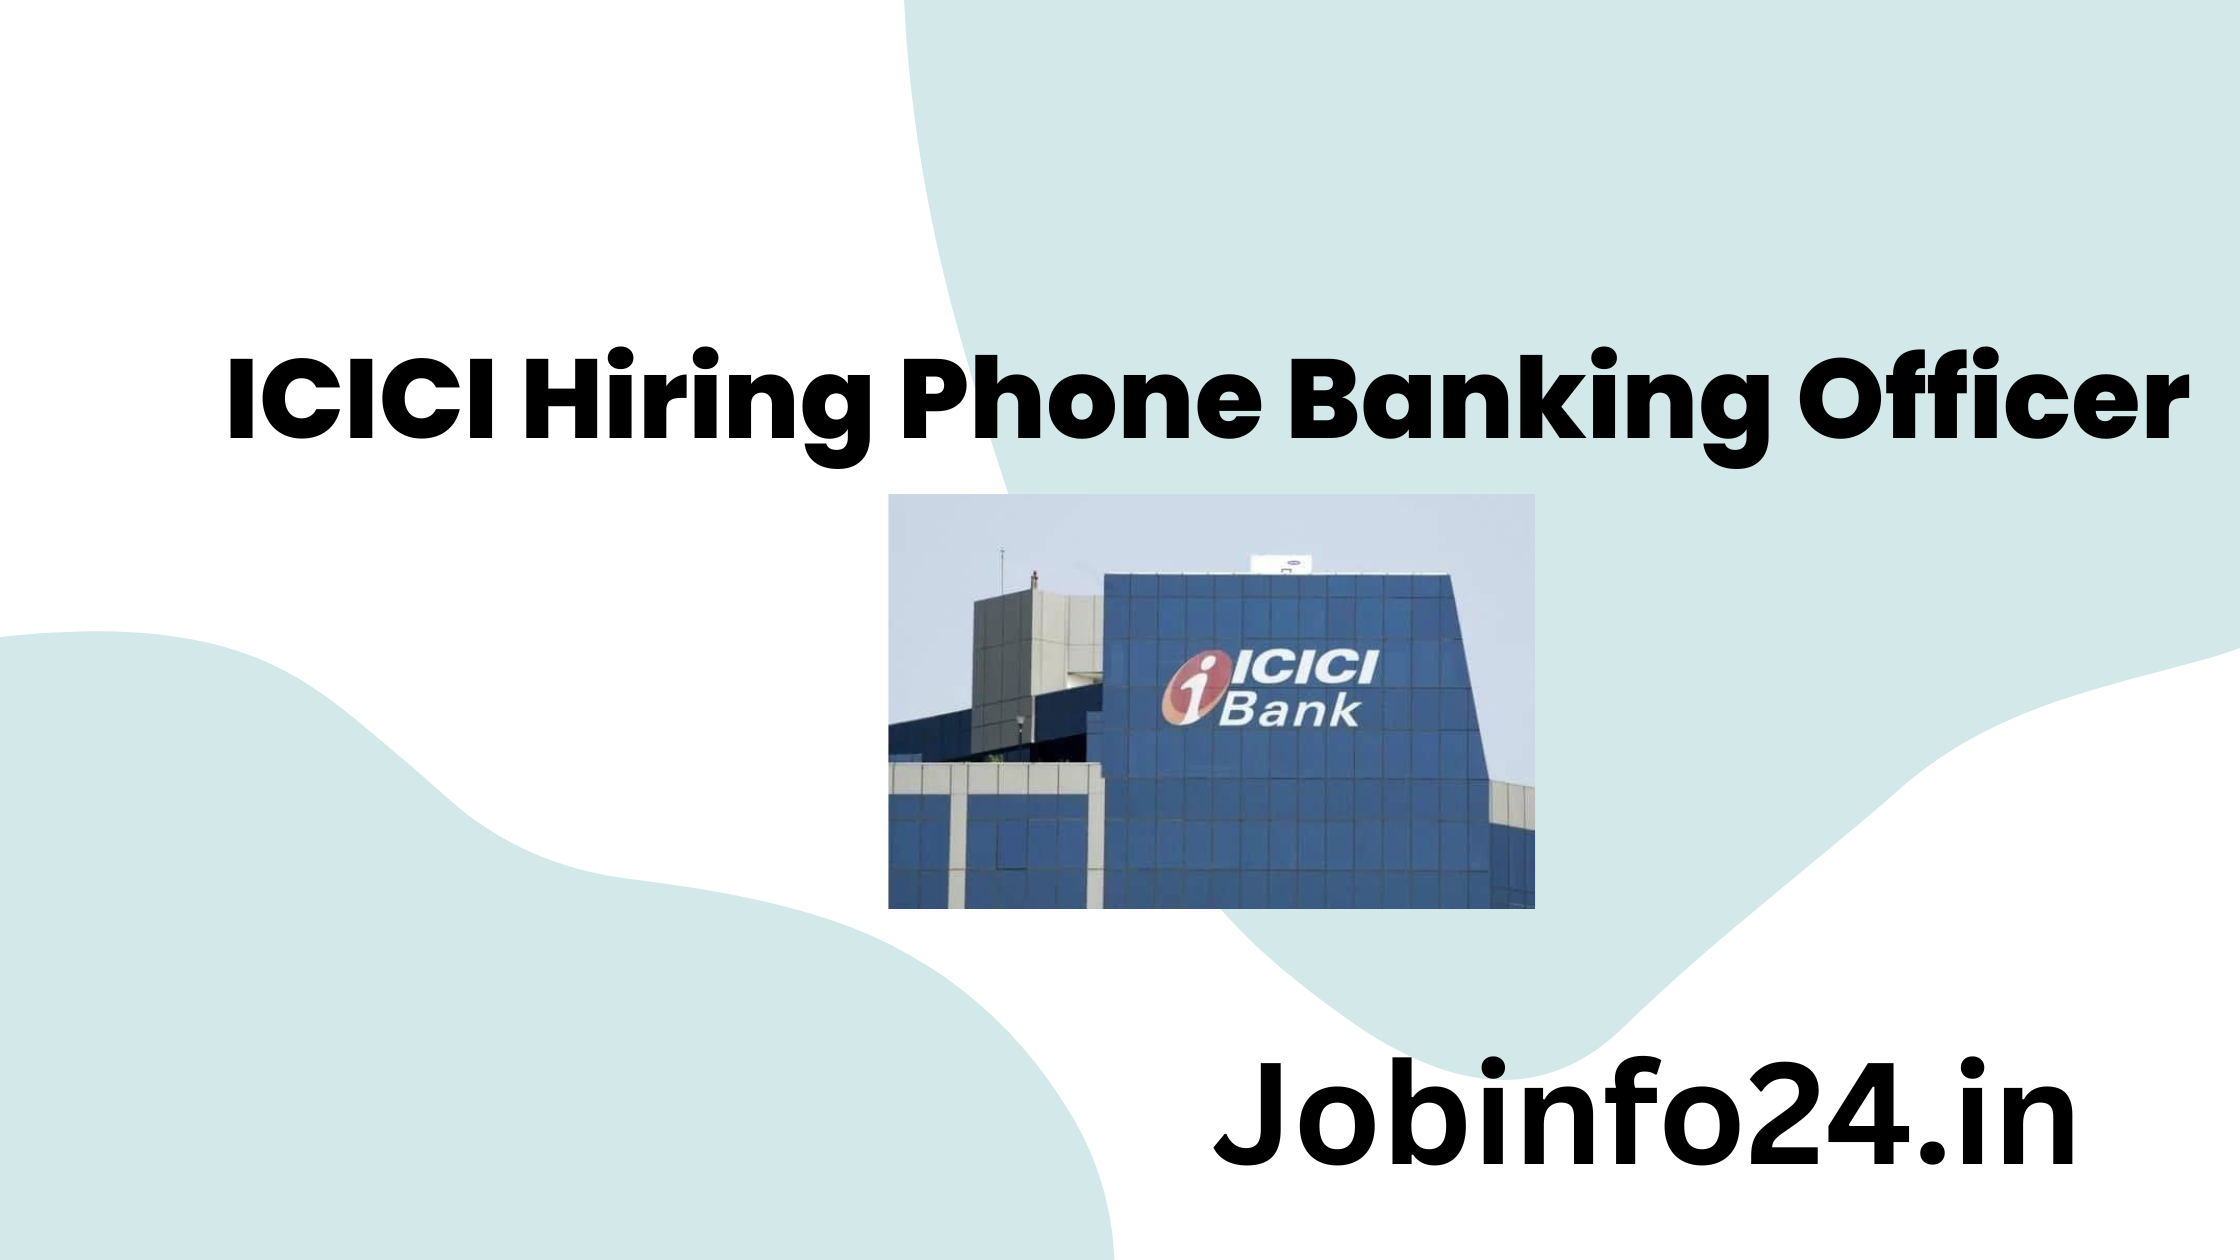 ICICI Hiring Phone Banking Officer